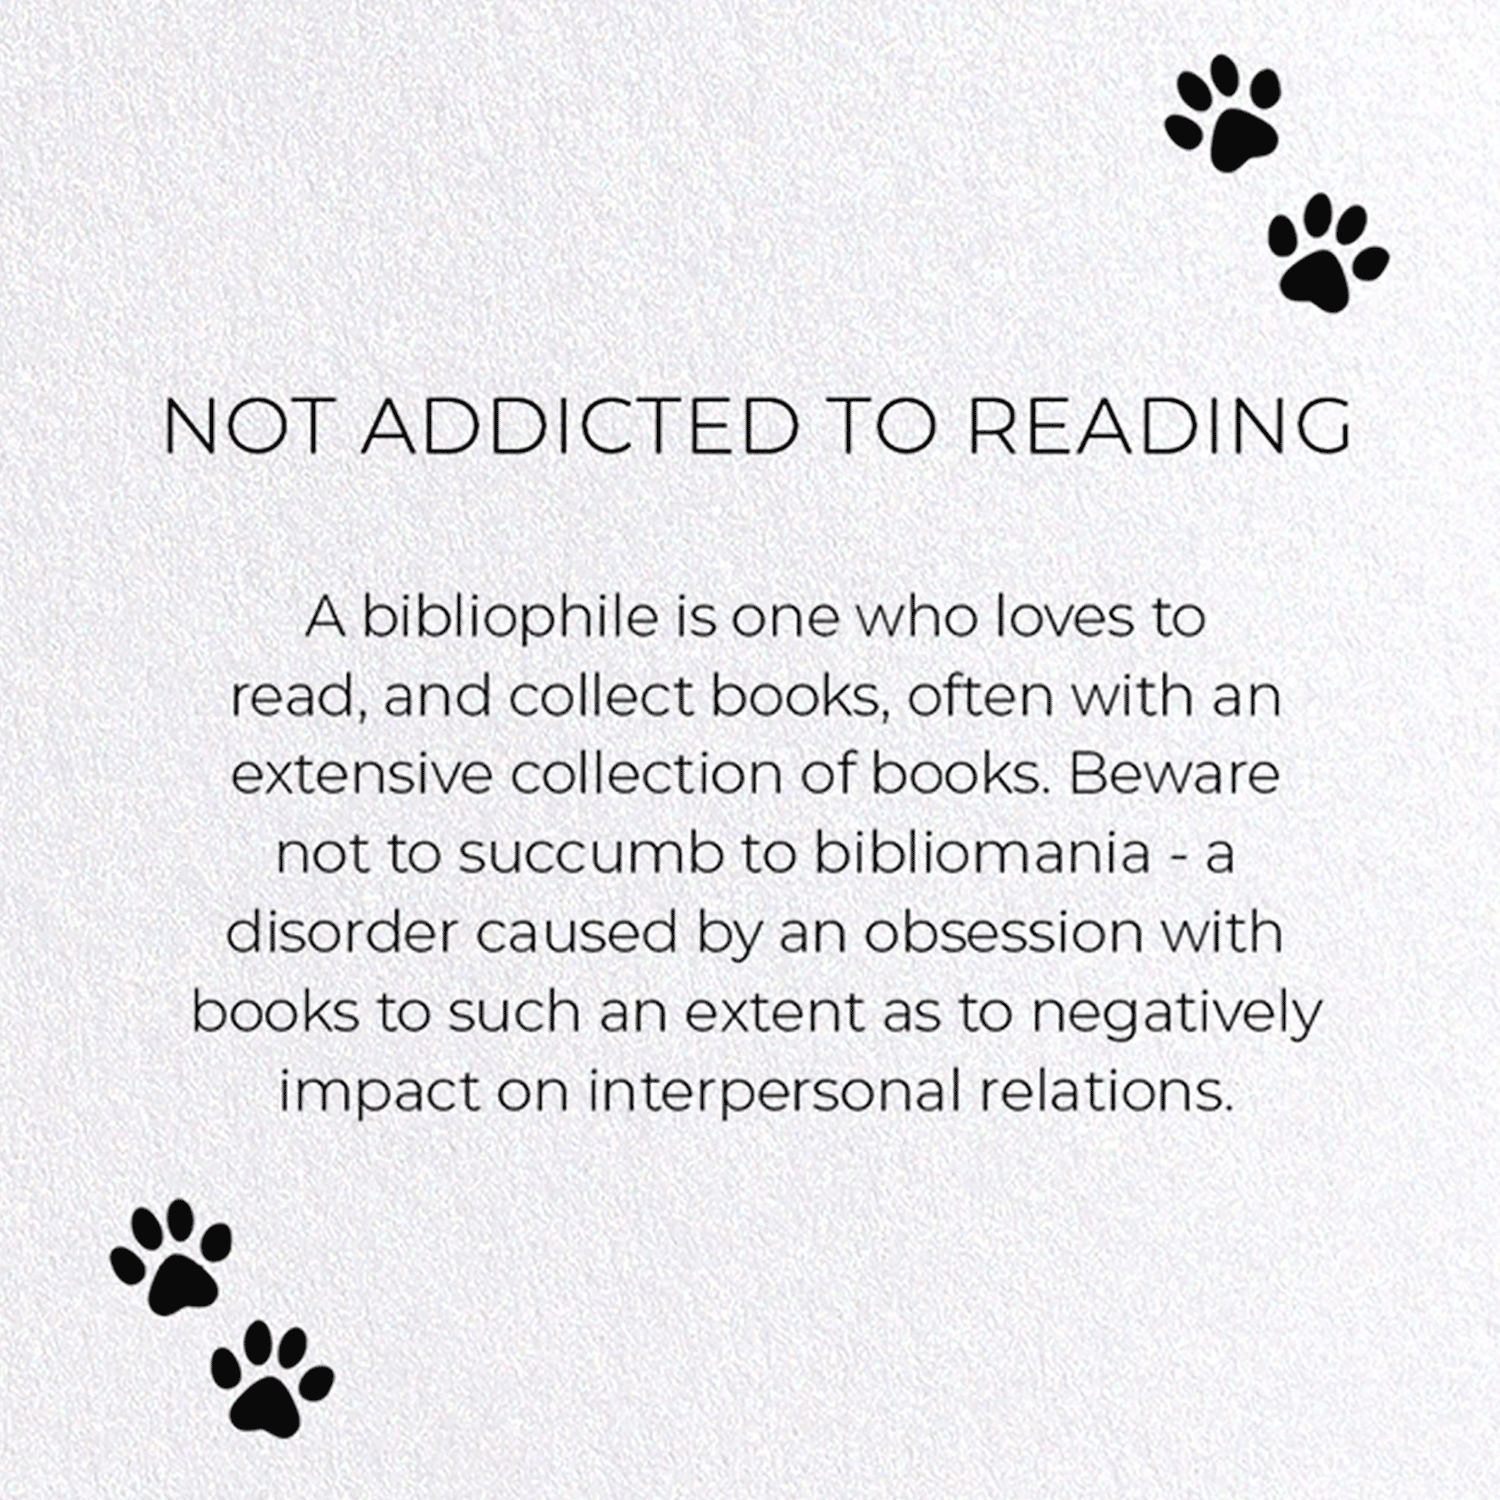 NOT ADDICTED TO READING: Funny Animal Greeting Card